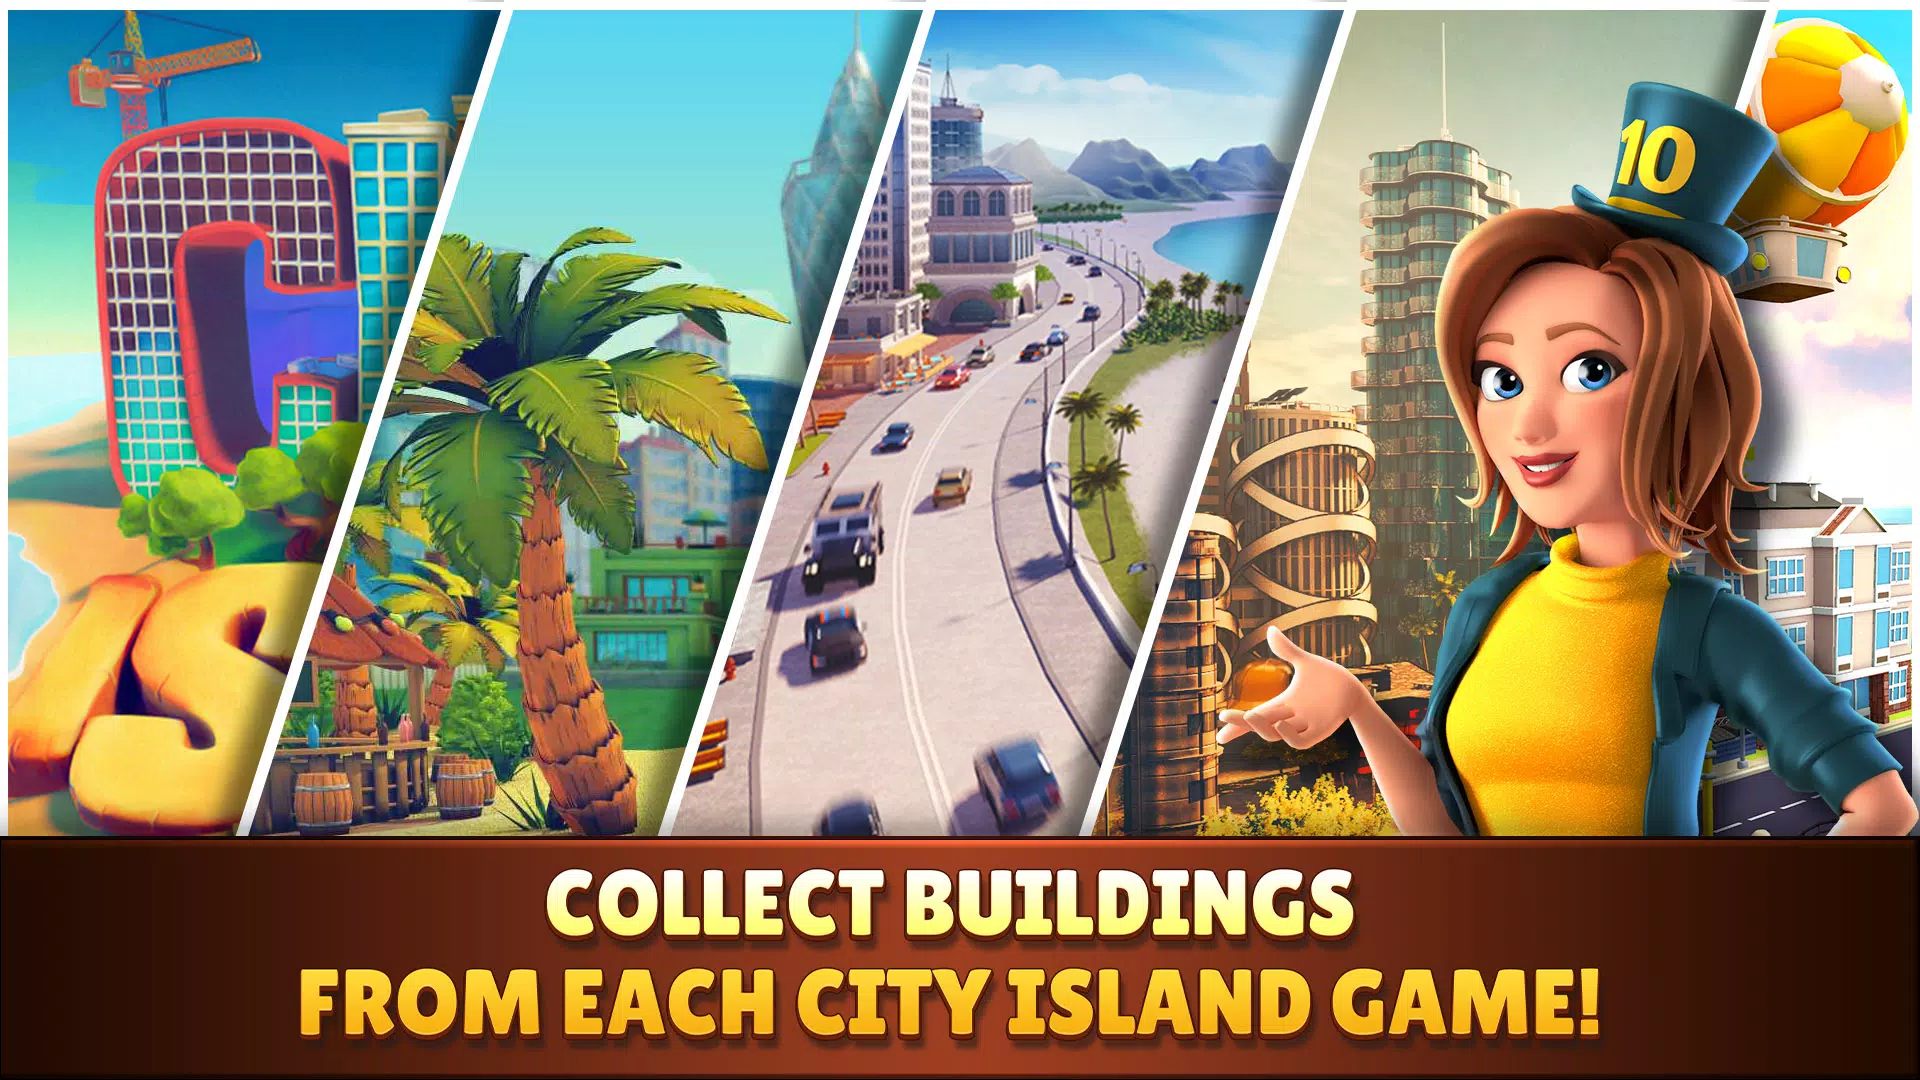 City Island 4: Simulation Town - Apps on Google Play